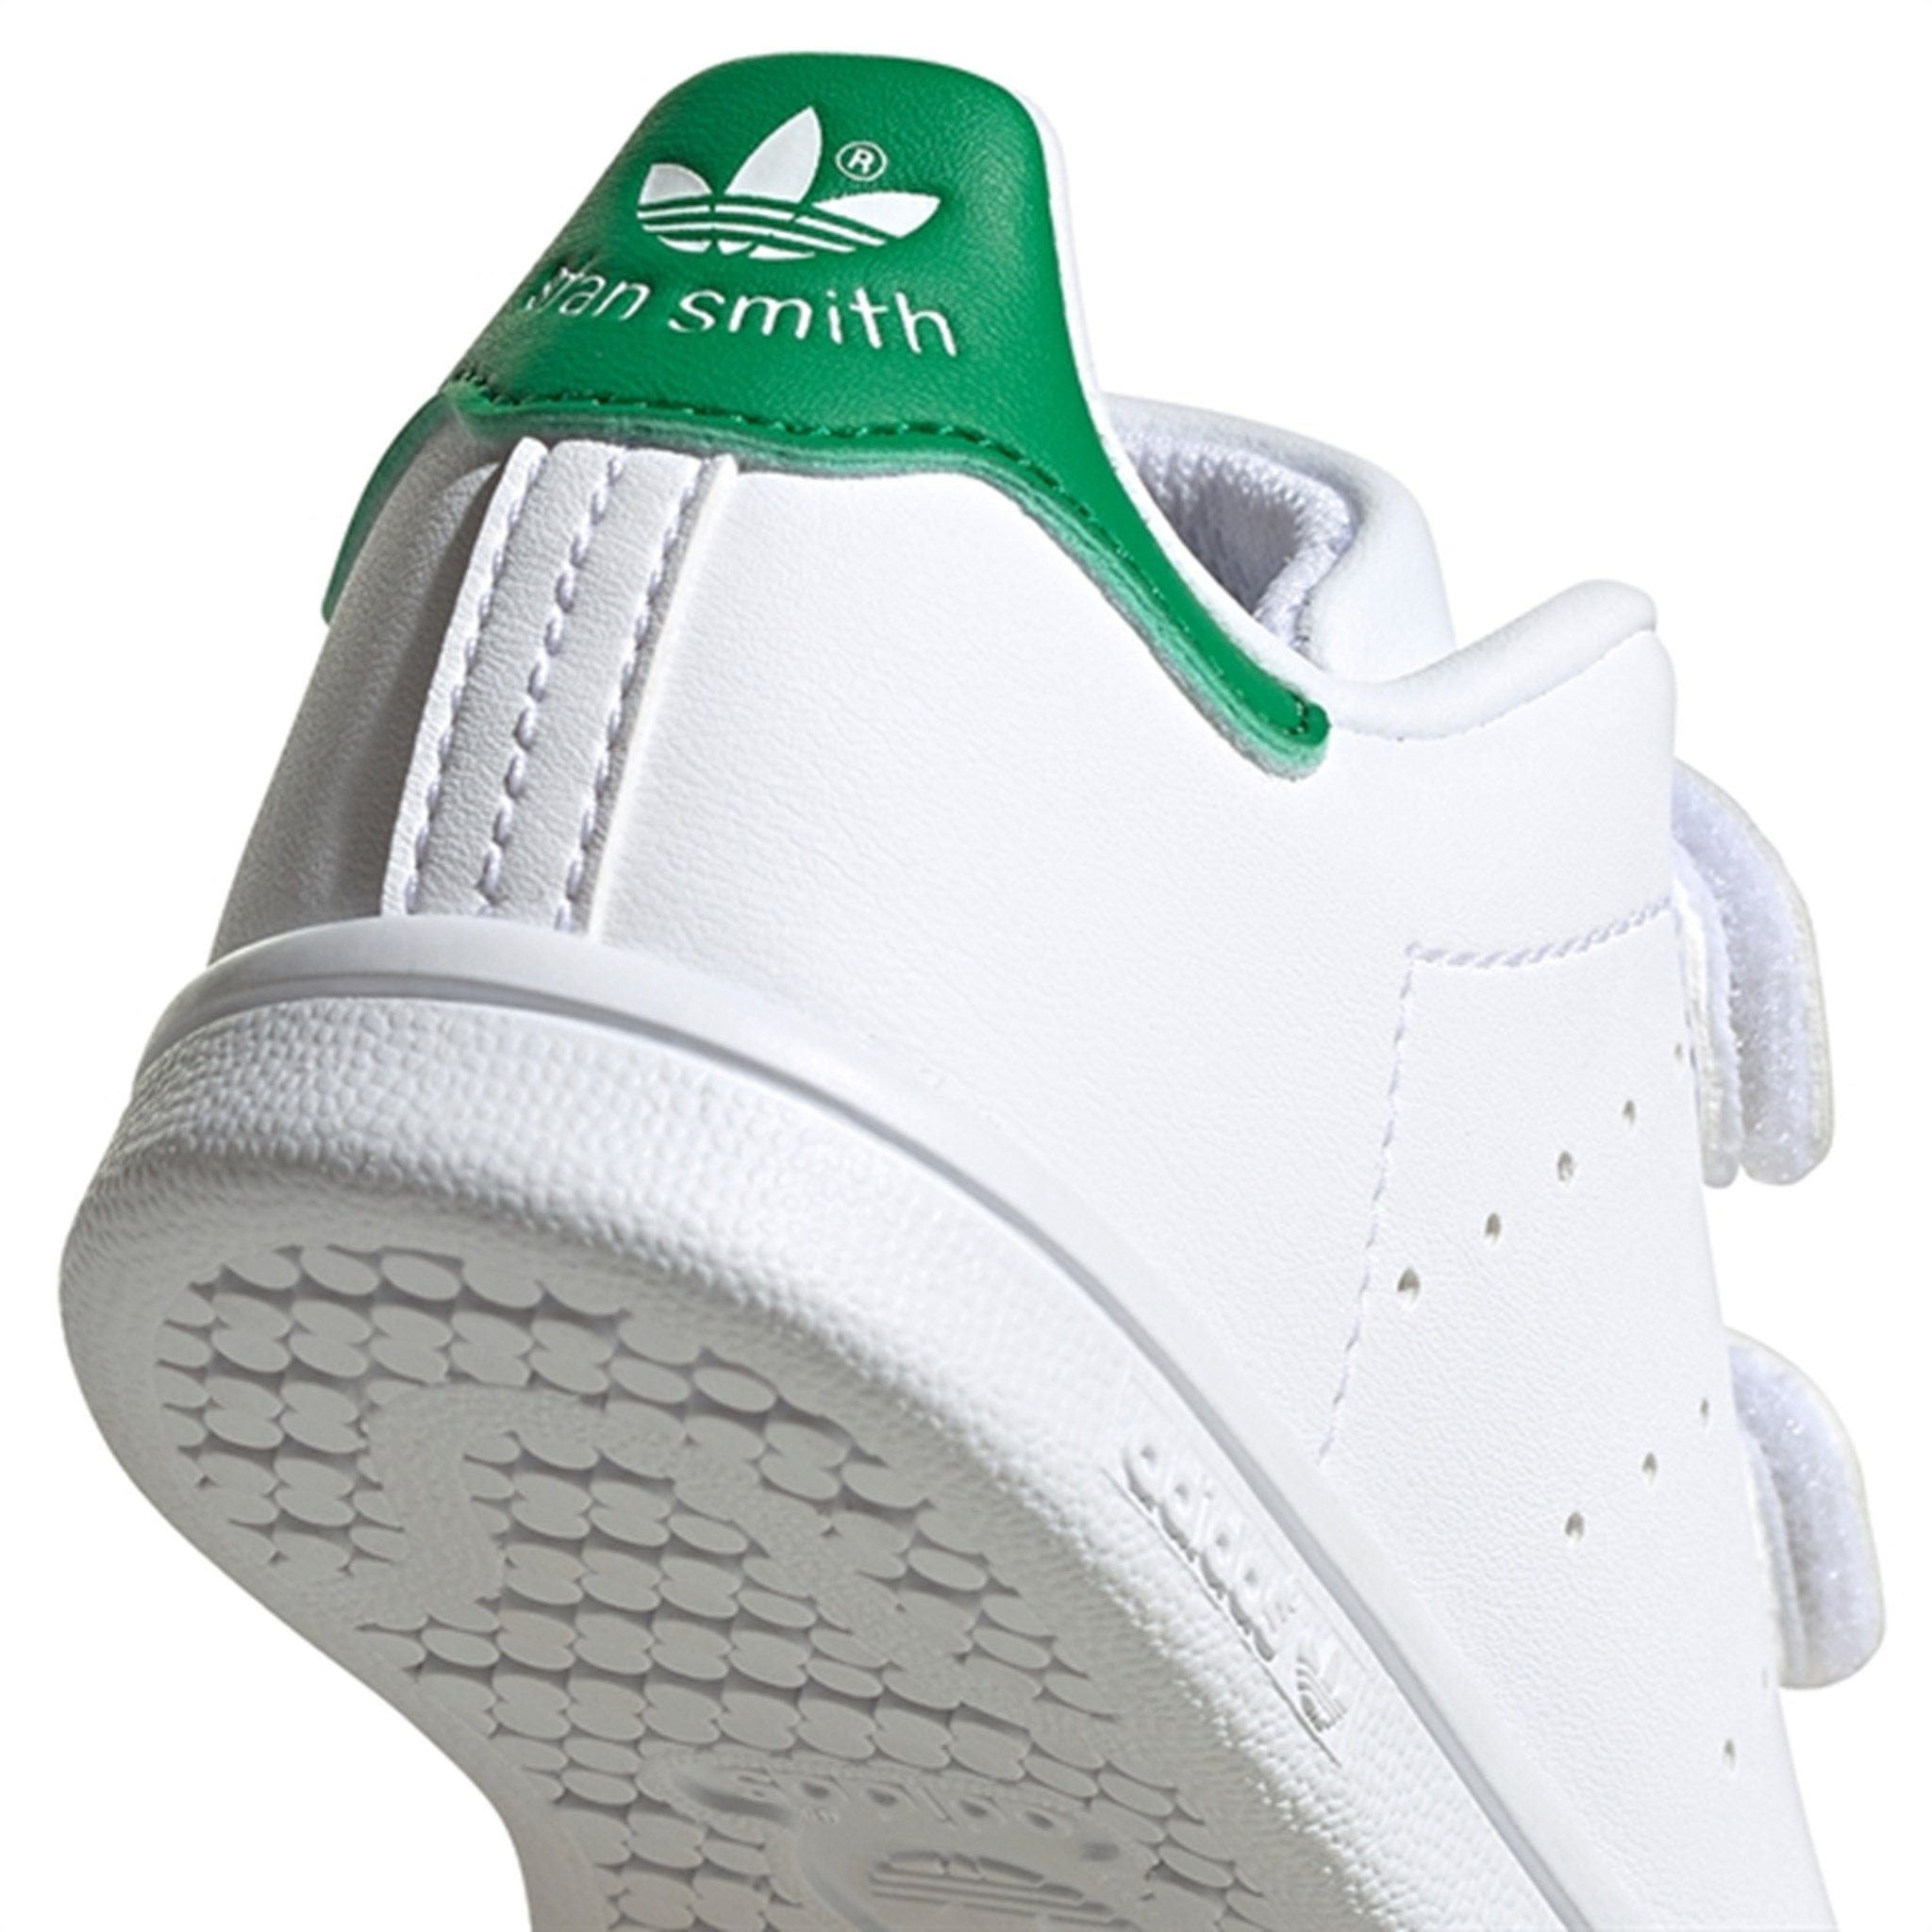 adidas Originals Stan Smith Sneakers Cloud White / Green 4